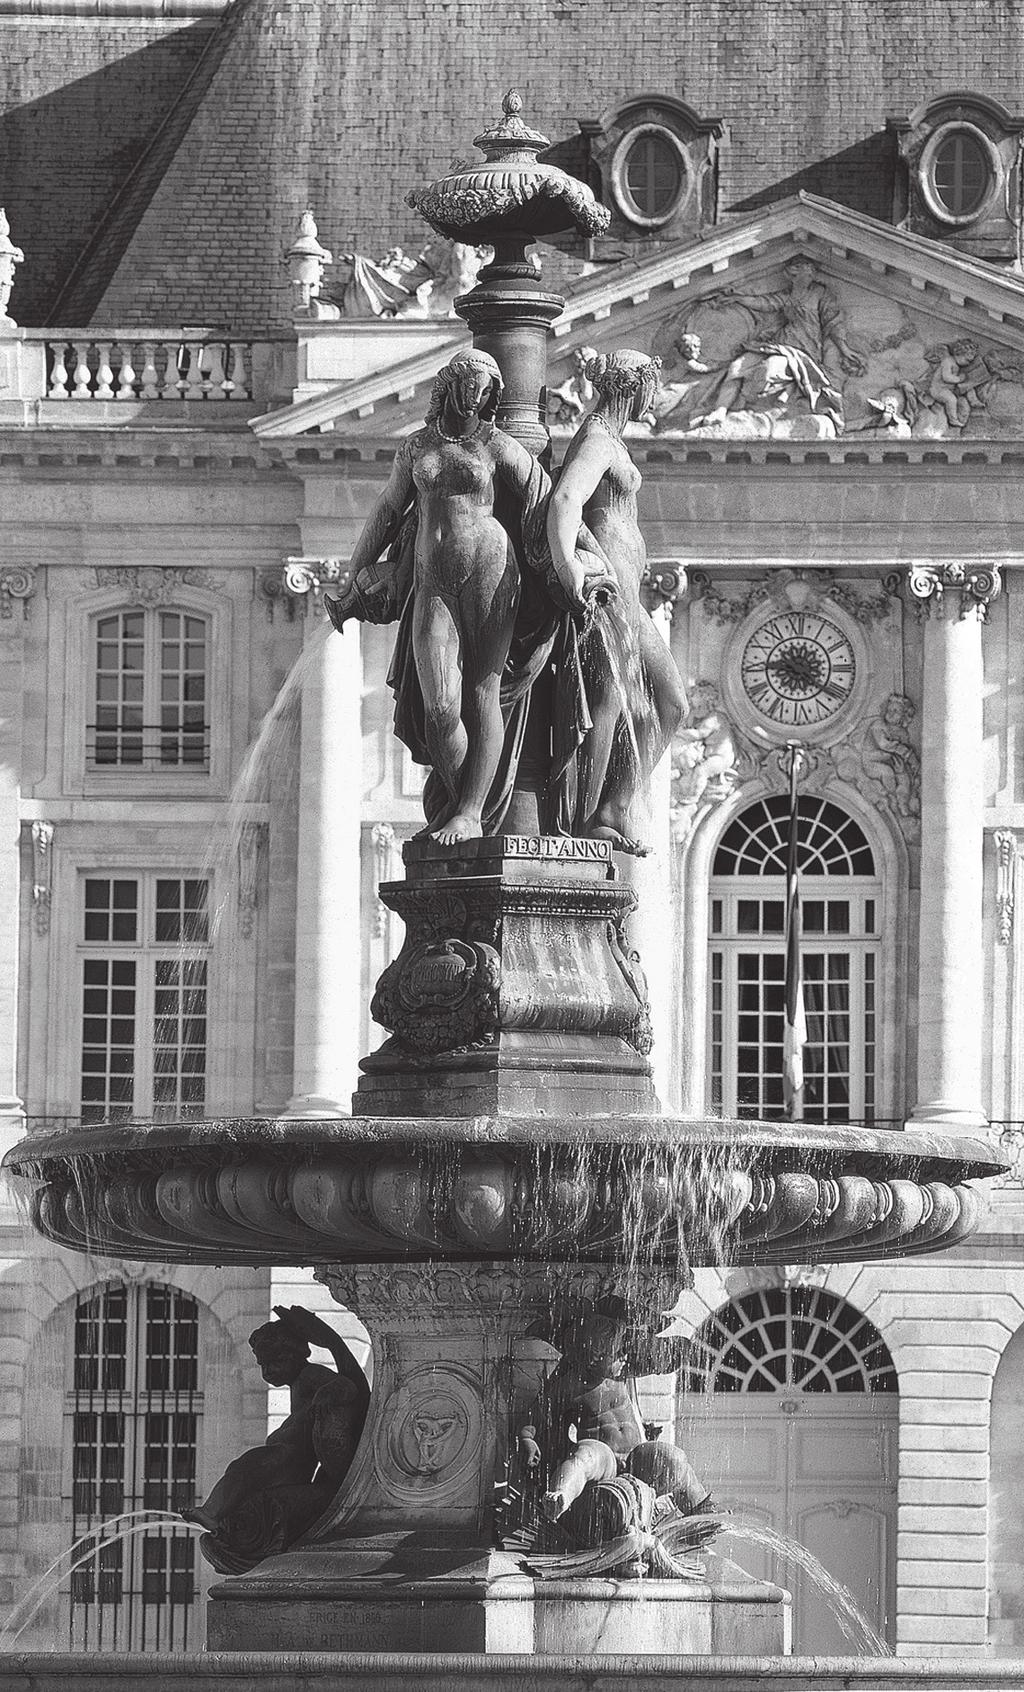 u 2 The Place de la Bourse, including its magnificent fountain, is a perfect example of late 18th-century Bordeaux architecture. U.S.